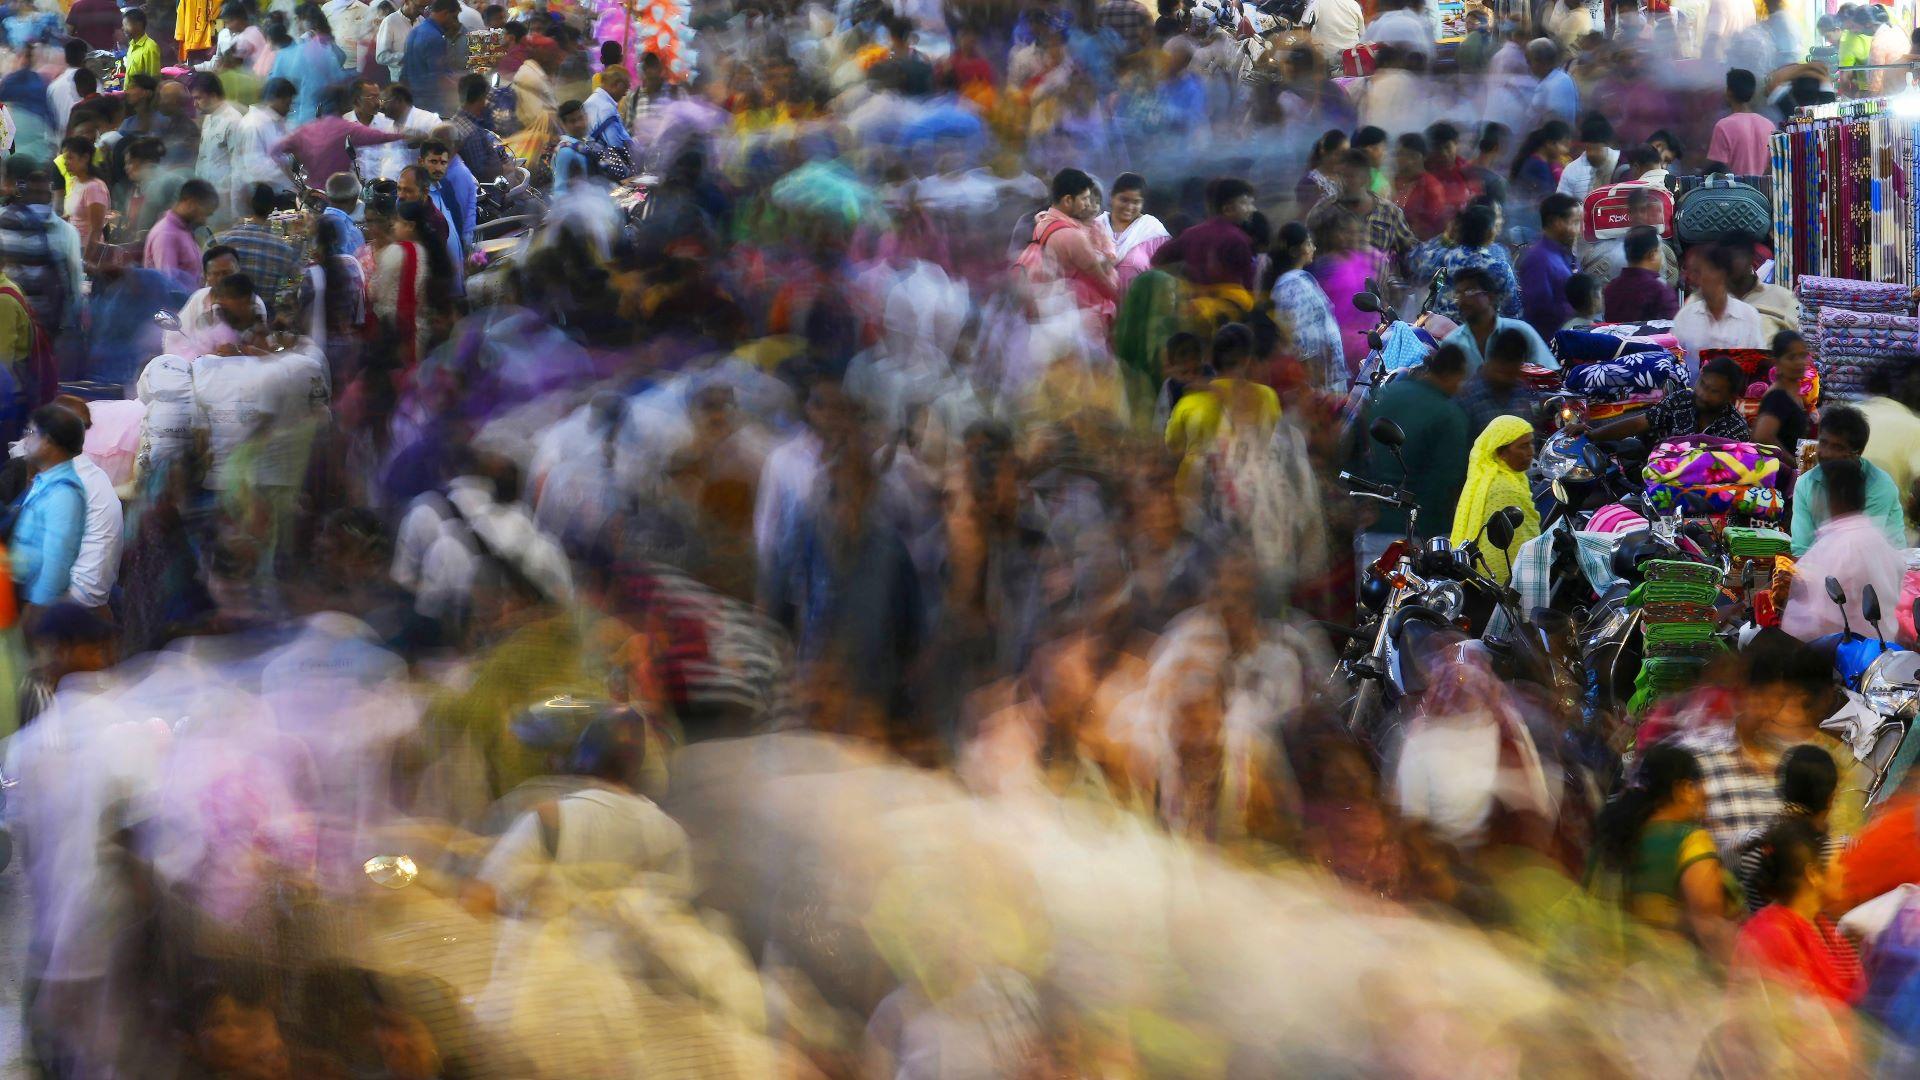 People move through a market in Mumbai, India, Saturday, Nov. 12, 2022. The world's population is projected to hit an estimated 8 billion people on Tuesday, Nov. 15, according to a United Nations projection. (AP Photo/Rajanish Kakade)